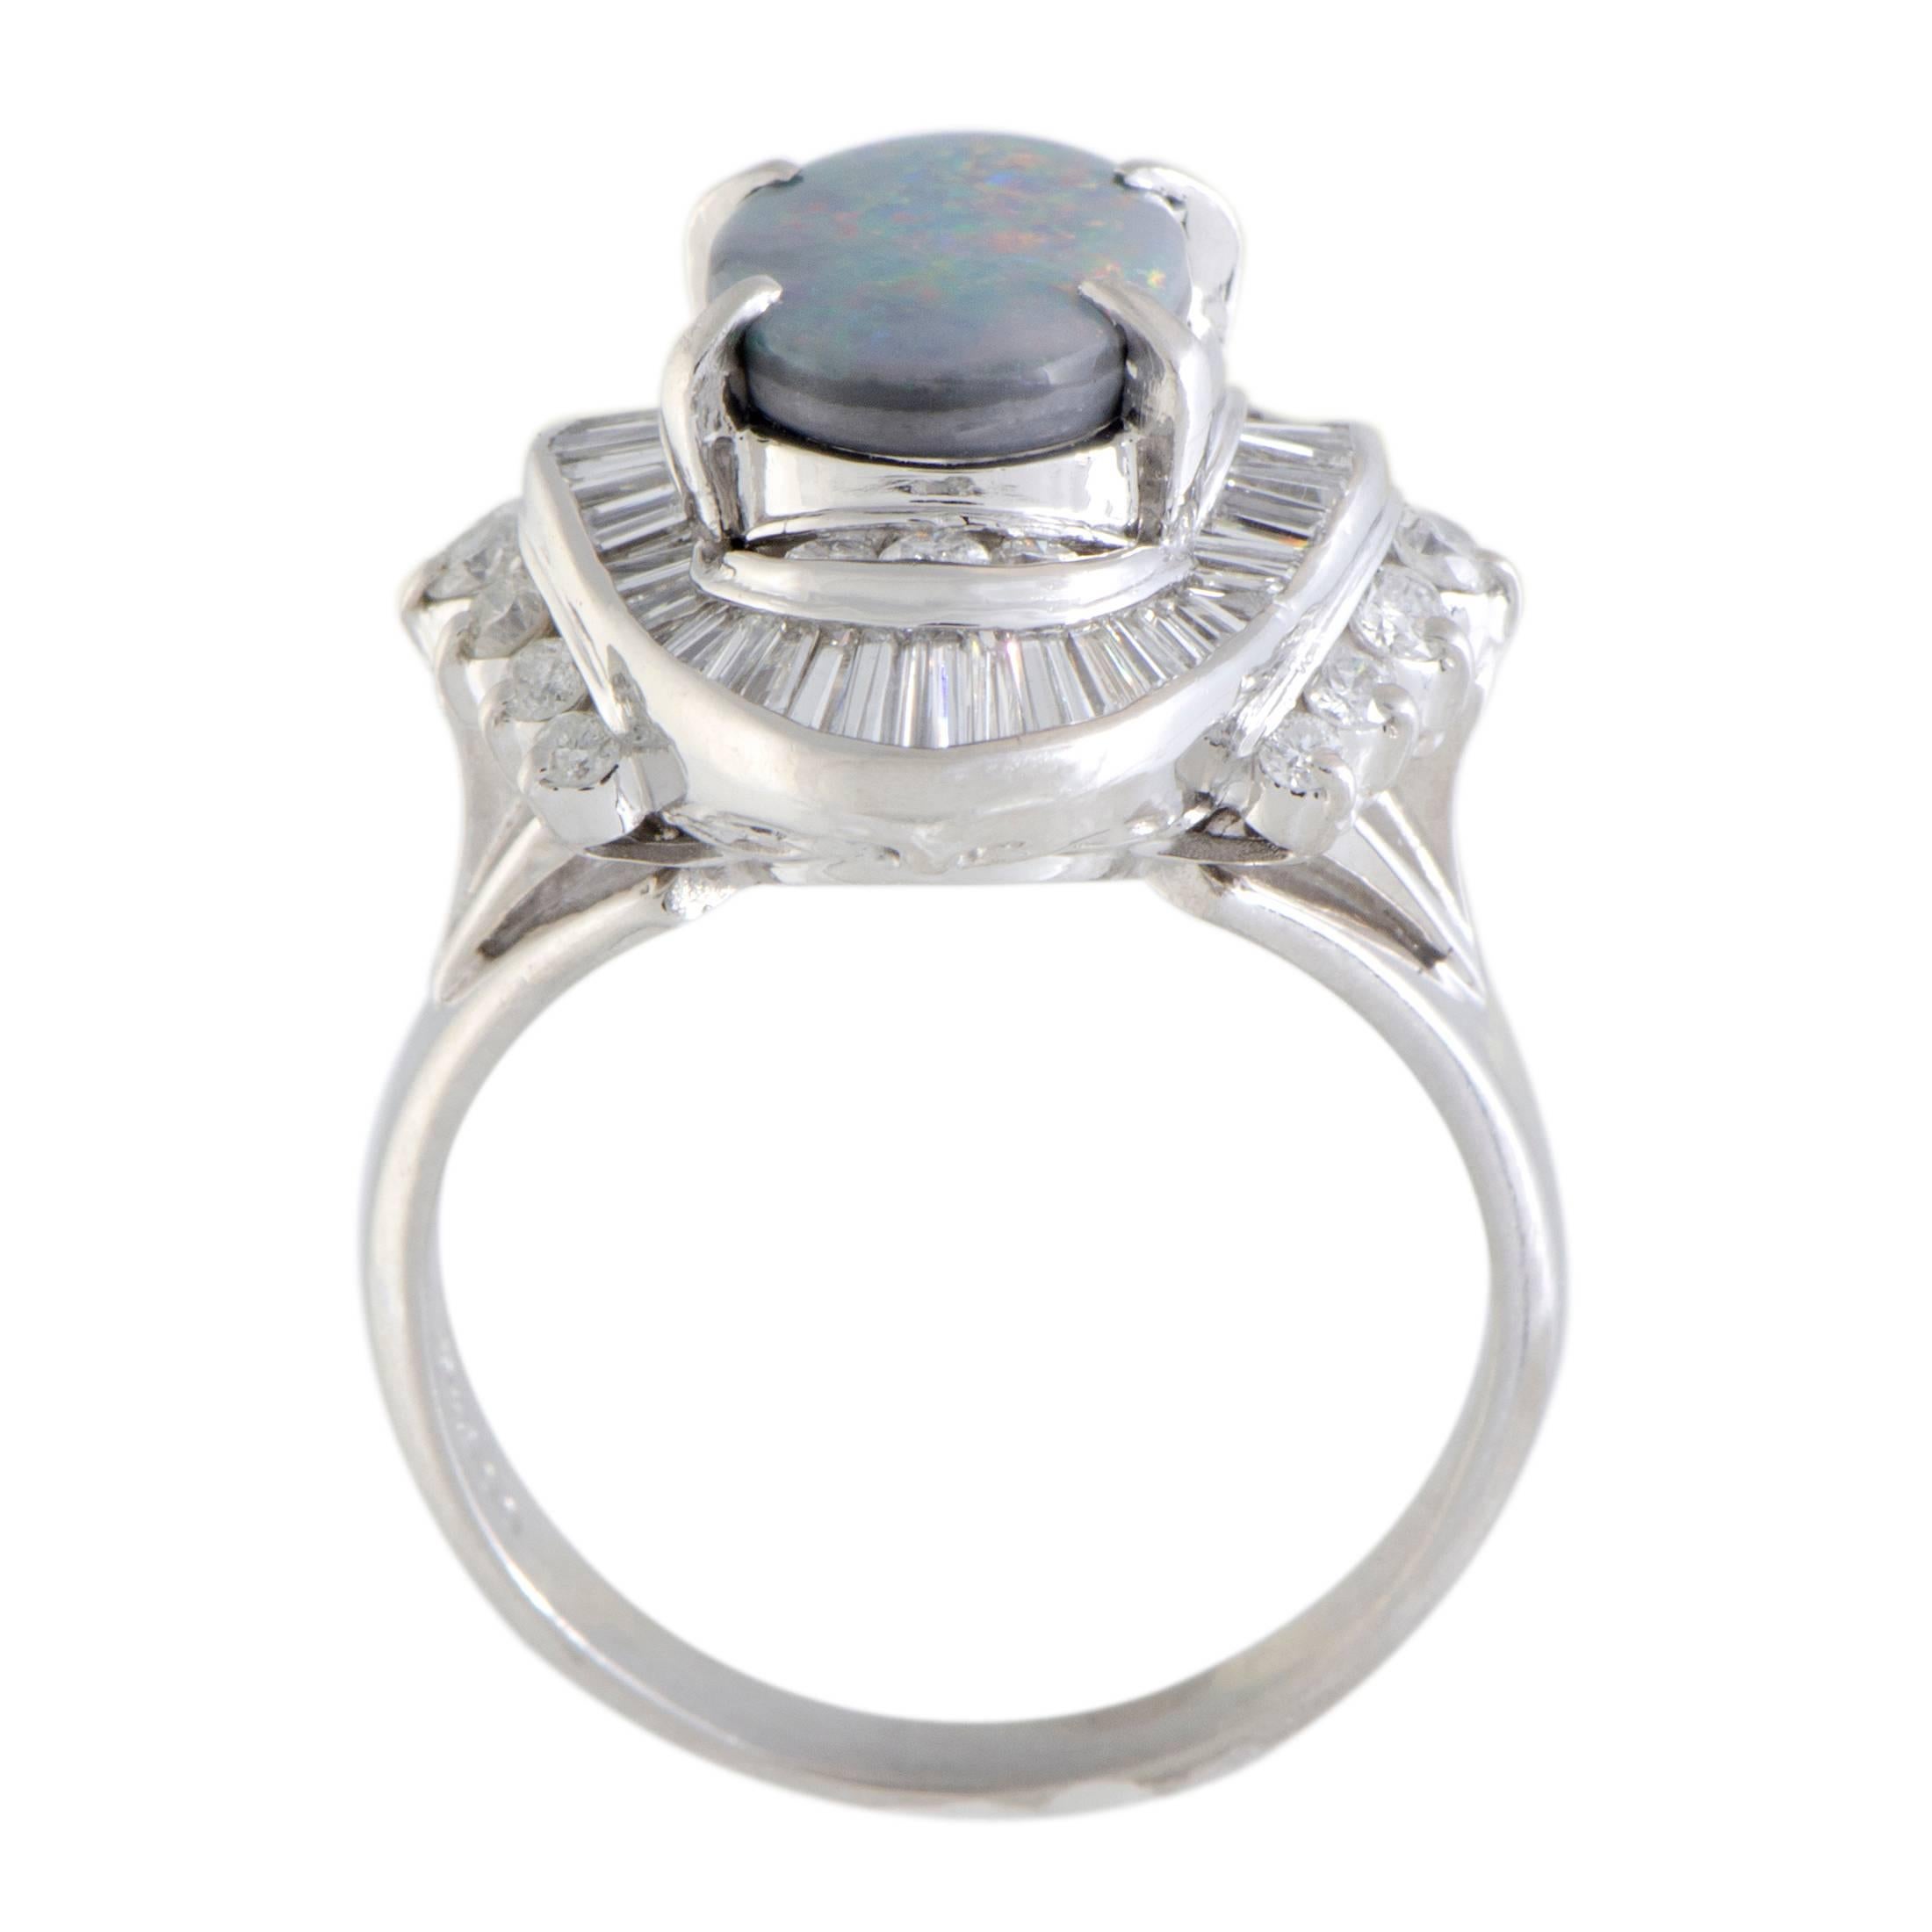 The prestigious sheen of platinum combined with the luxurious resplendence of diamonds presents the perfect backdrop for the colorful opal in this stunning ring. The diamond stones amount to 1.08 carats, while the opal weighs 1.78 carats.
Ring Top